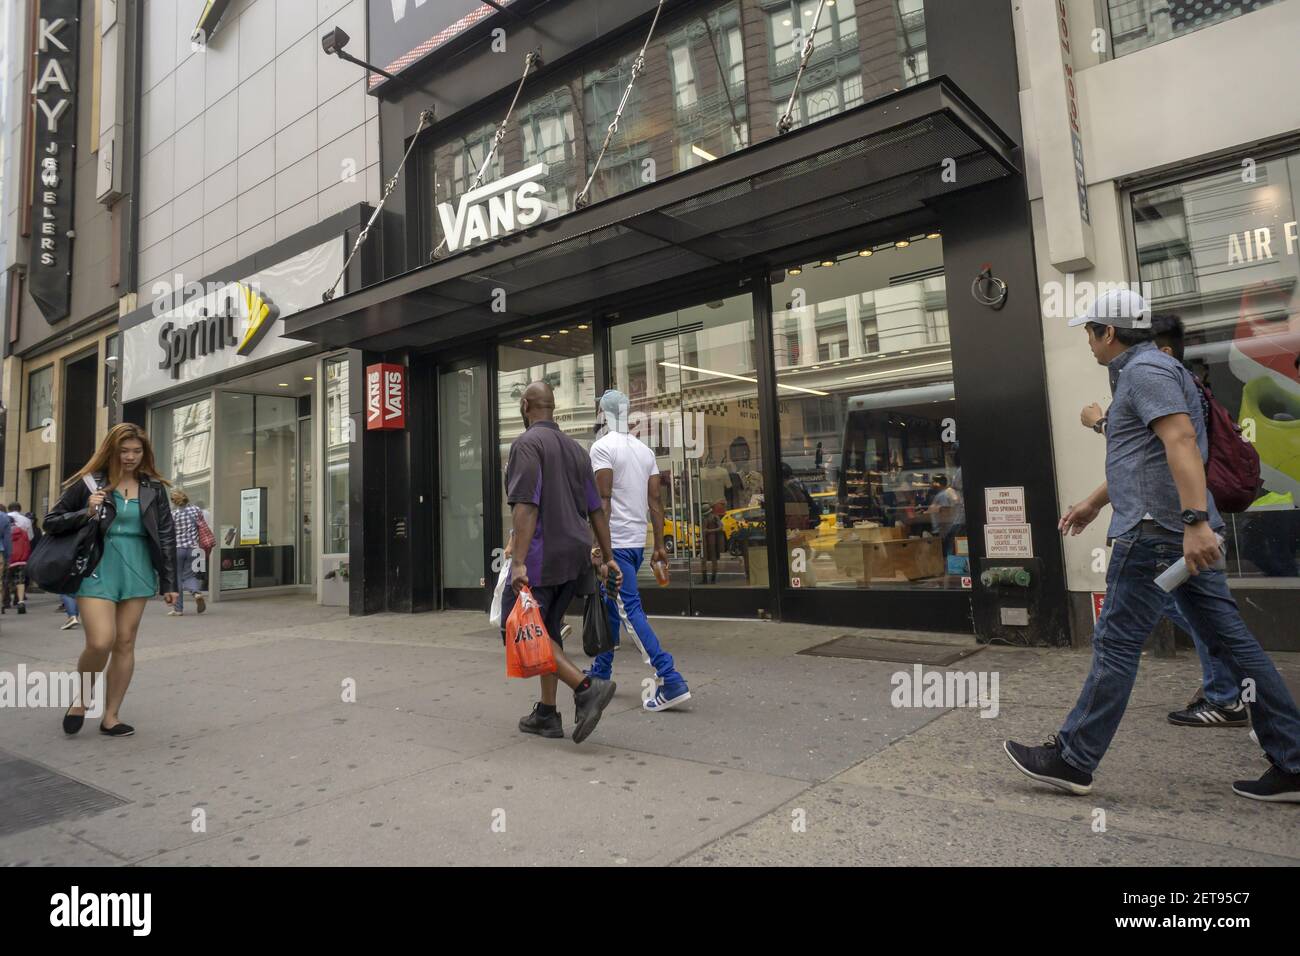 A Vans footwear store in Herald Square in New York on Friday, May 4, 2018.  VF Corp, owner of iconic brands Vans, North Face, Timberland, the closing  Henri Bendel and a multitude